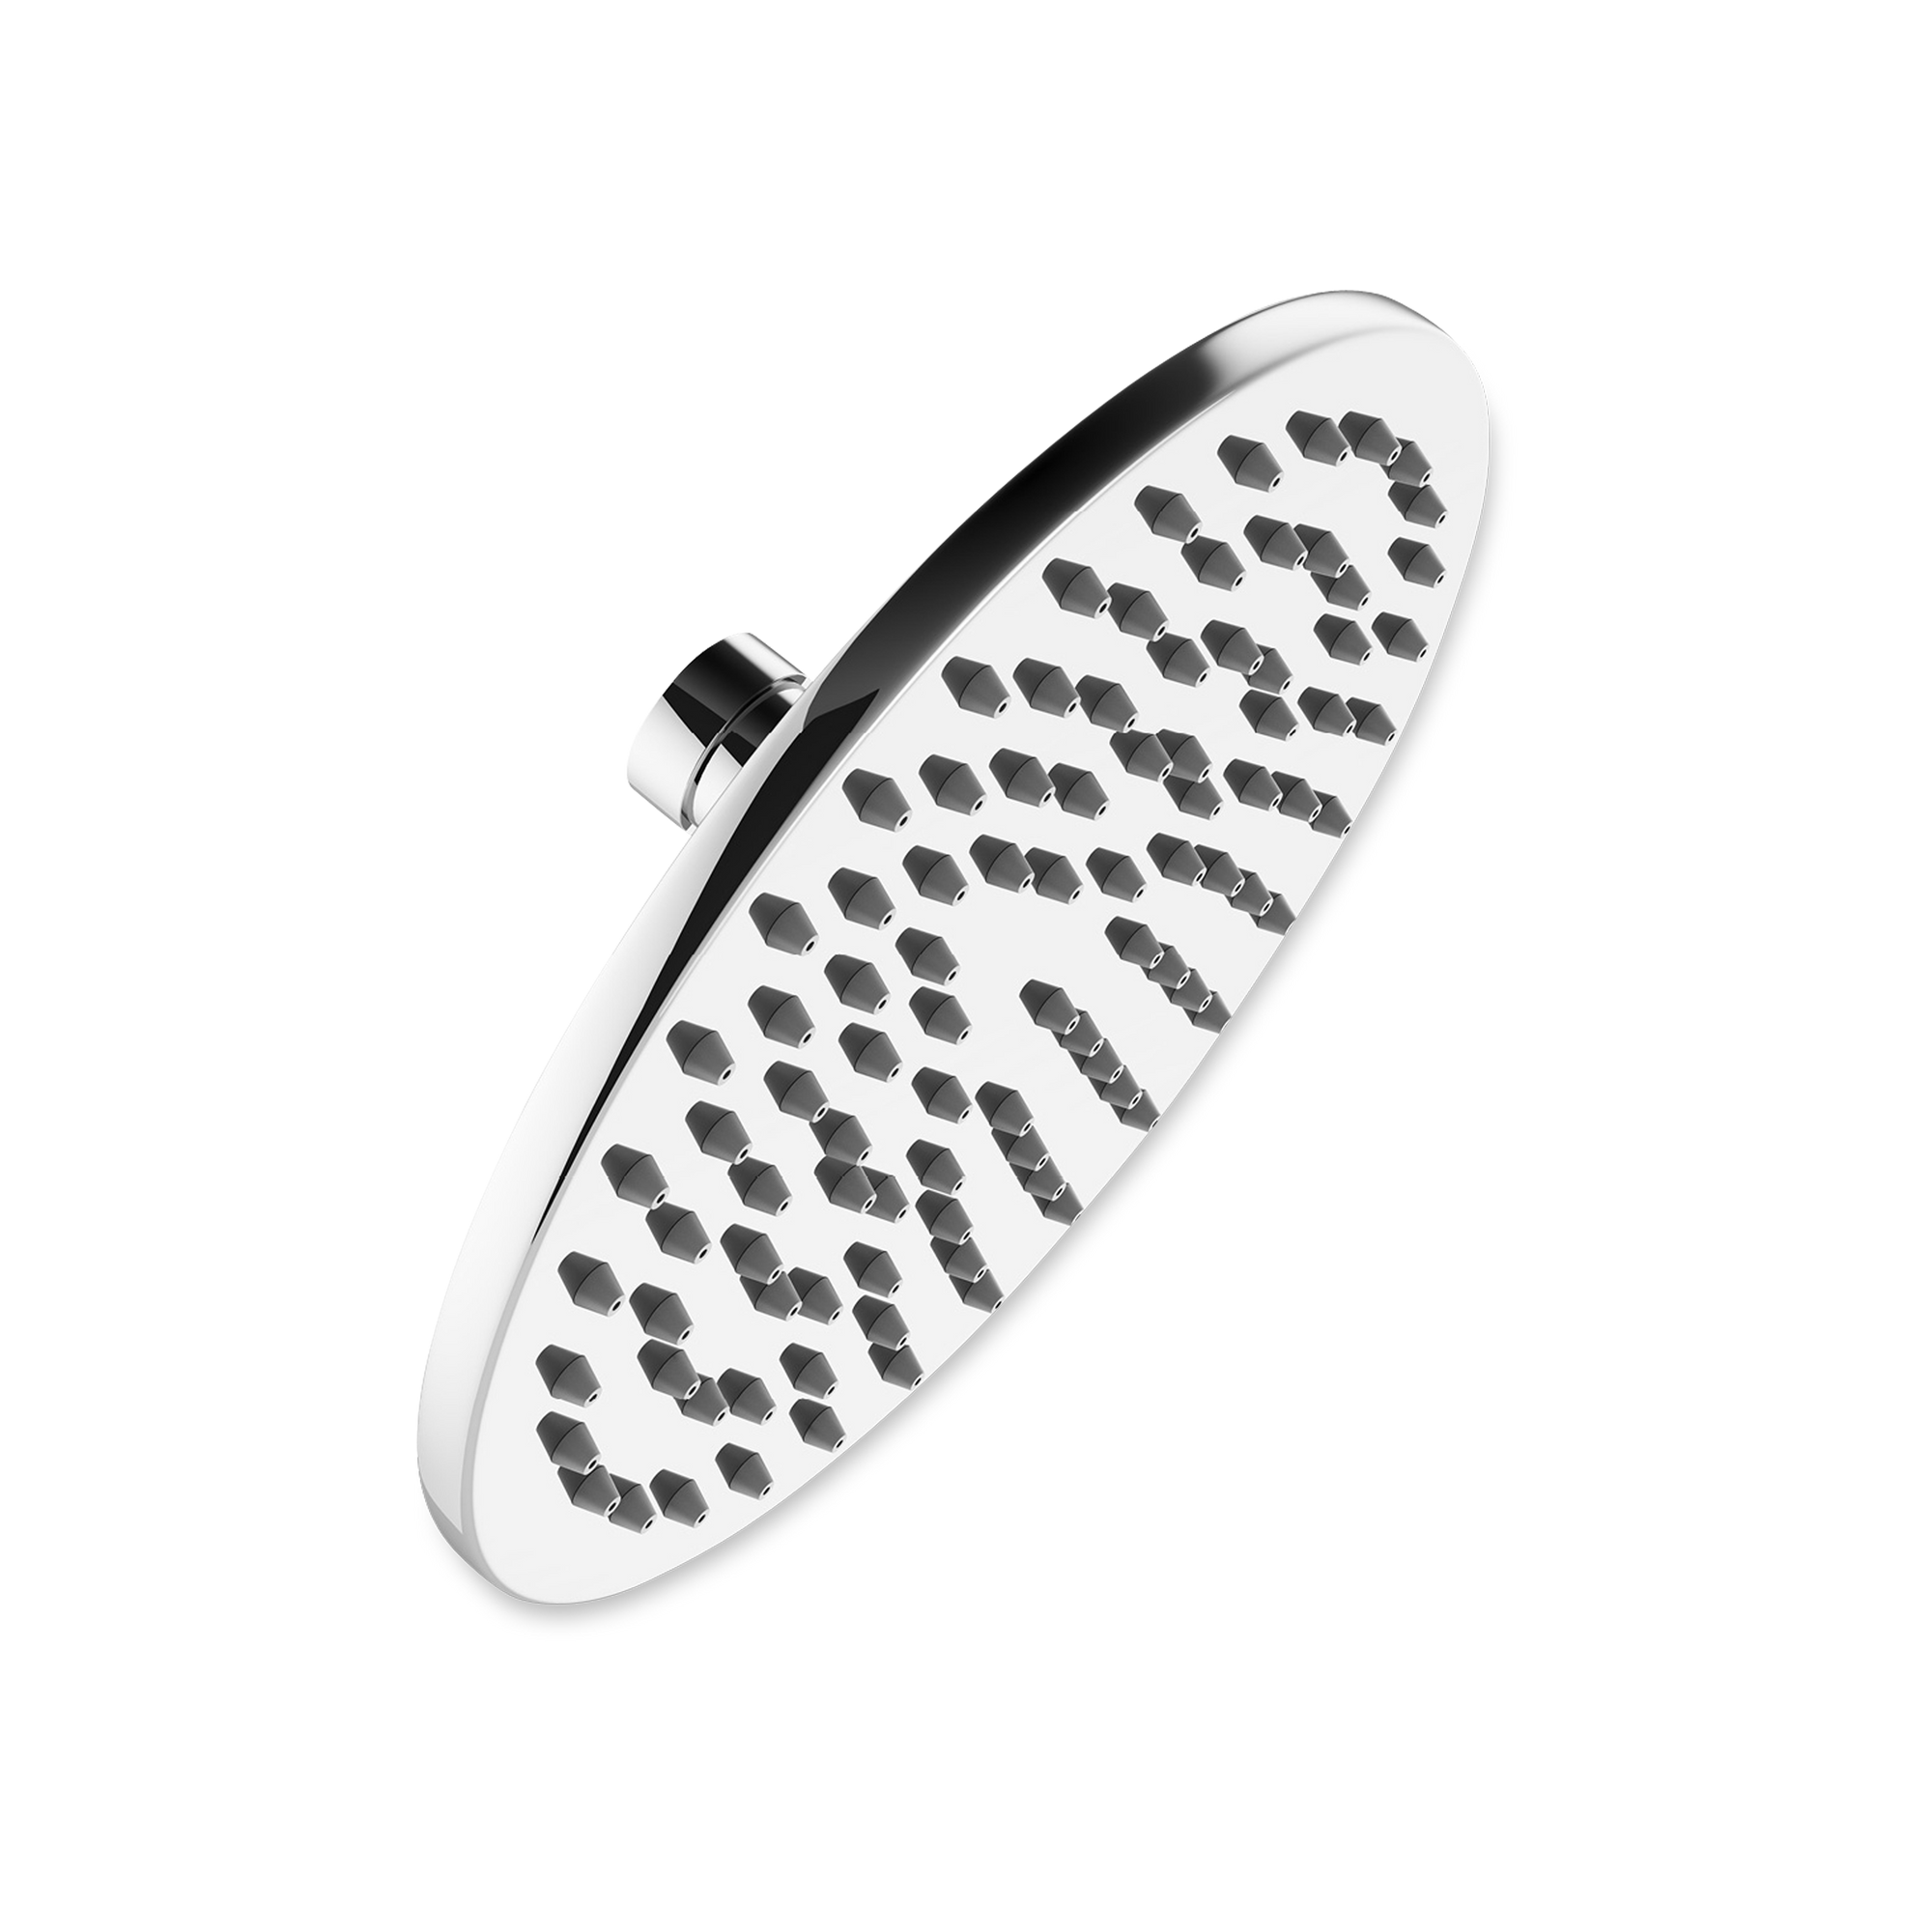 A modern shower head featuring cylindrical shapes and curved lines creating a simple clean feel.